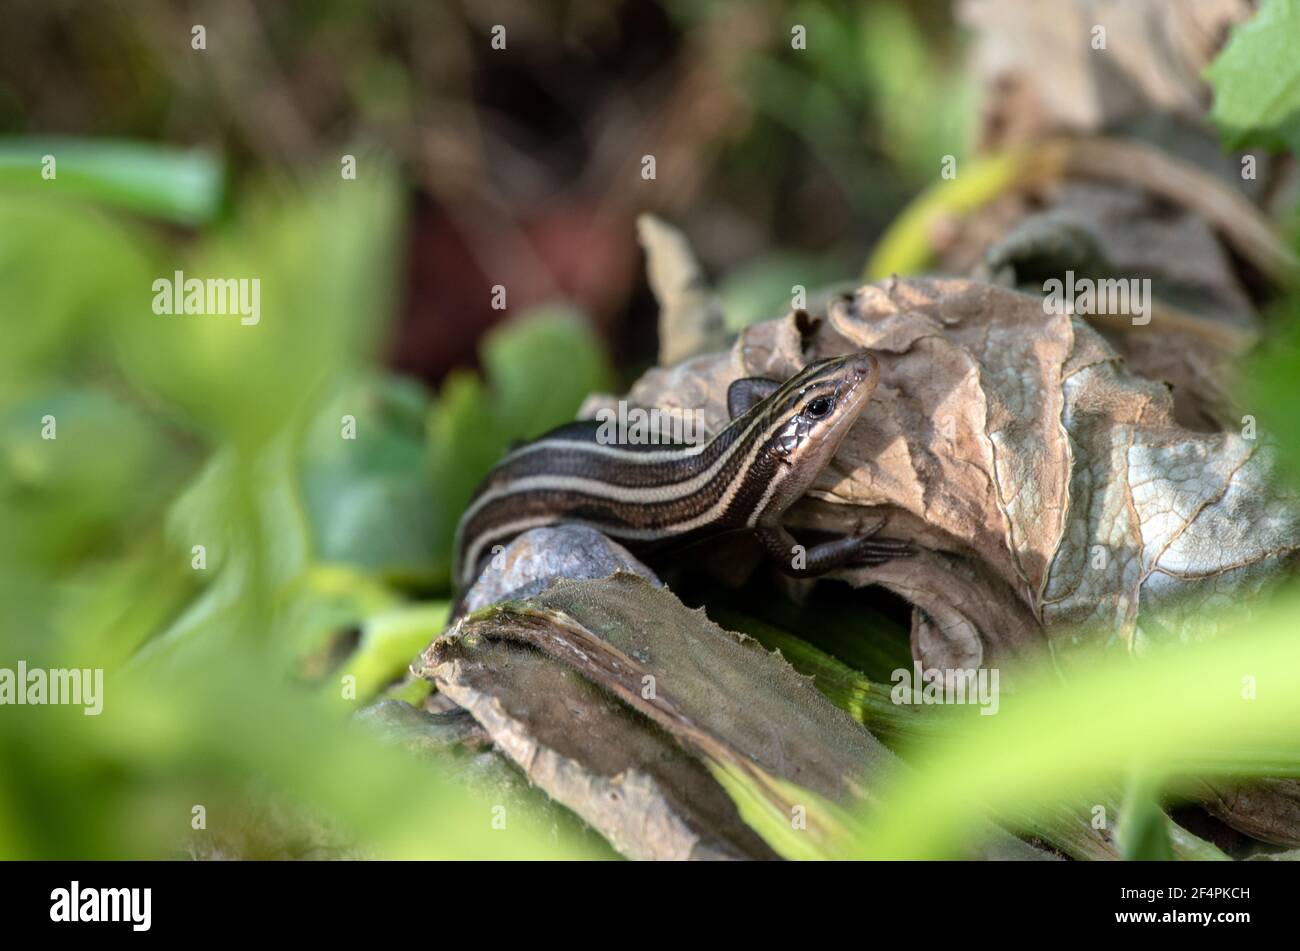 A nice bokeh effect draws attention to the juvenile five lined skink that stands motionless in a Missouri backyard garden. Stock Photo